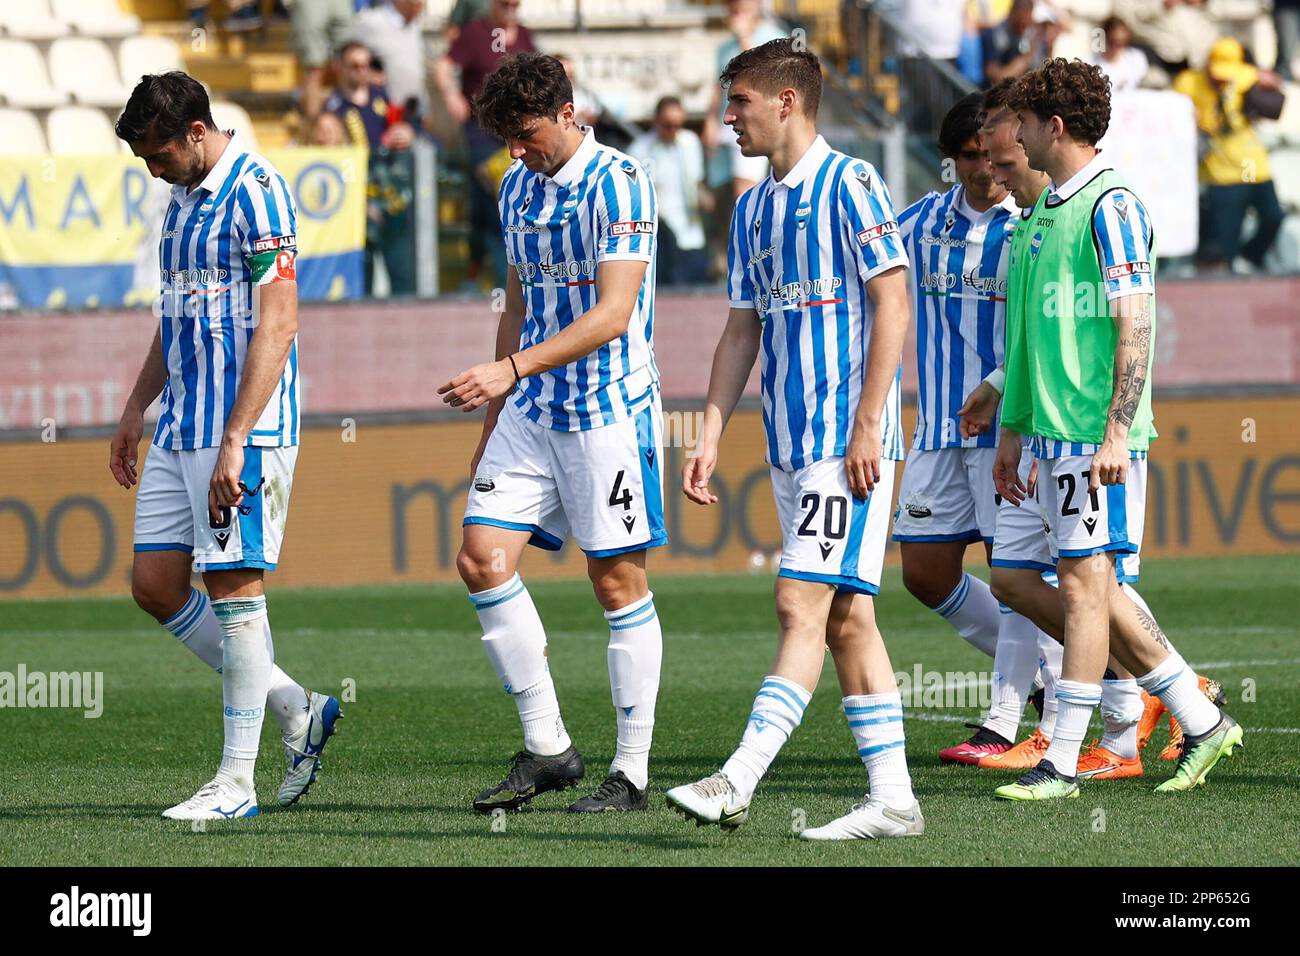 Modena, Italy. 22nd Apr, 2023. Diego Falcinelli (Modena) during Modena FC vs  SPAL, Italian soccer Serie B match in Modena, Italy, April 22 2023 Credit:  Independent Photo Agency/Alamy Live News Stock Photo - Alamy